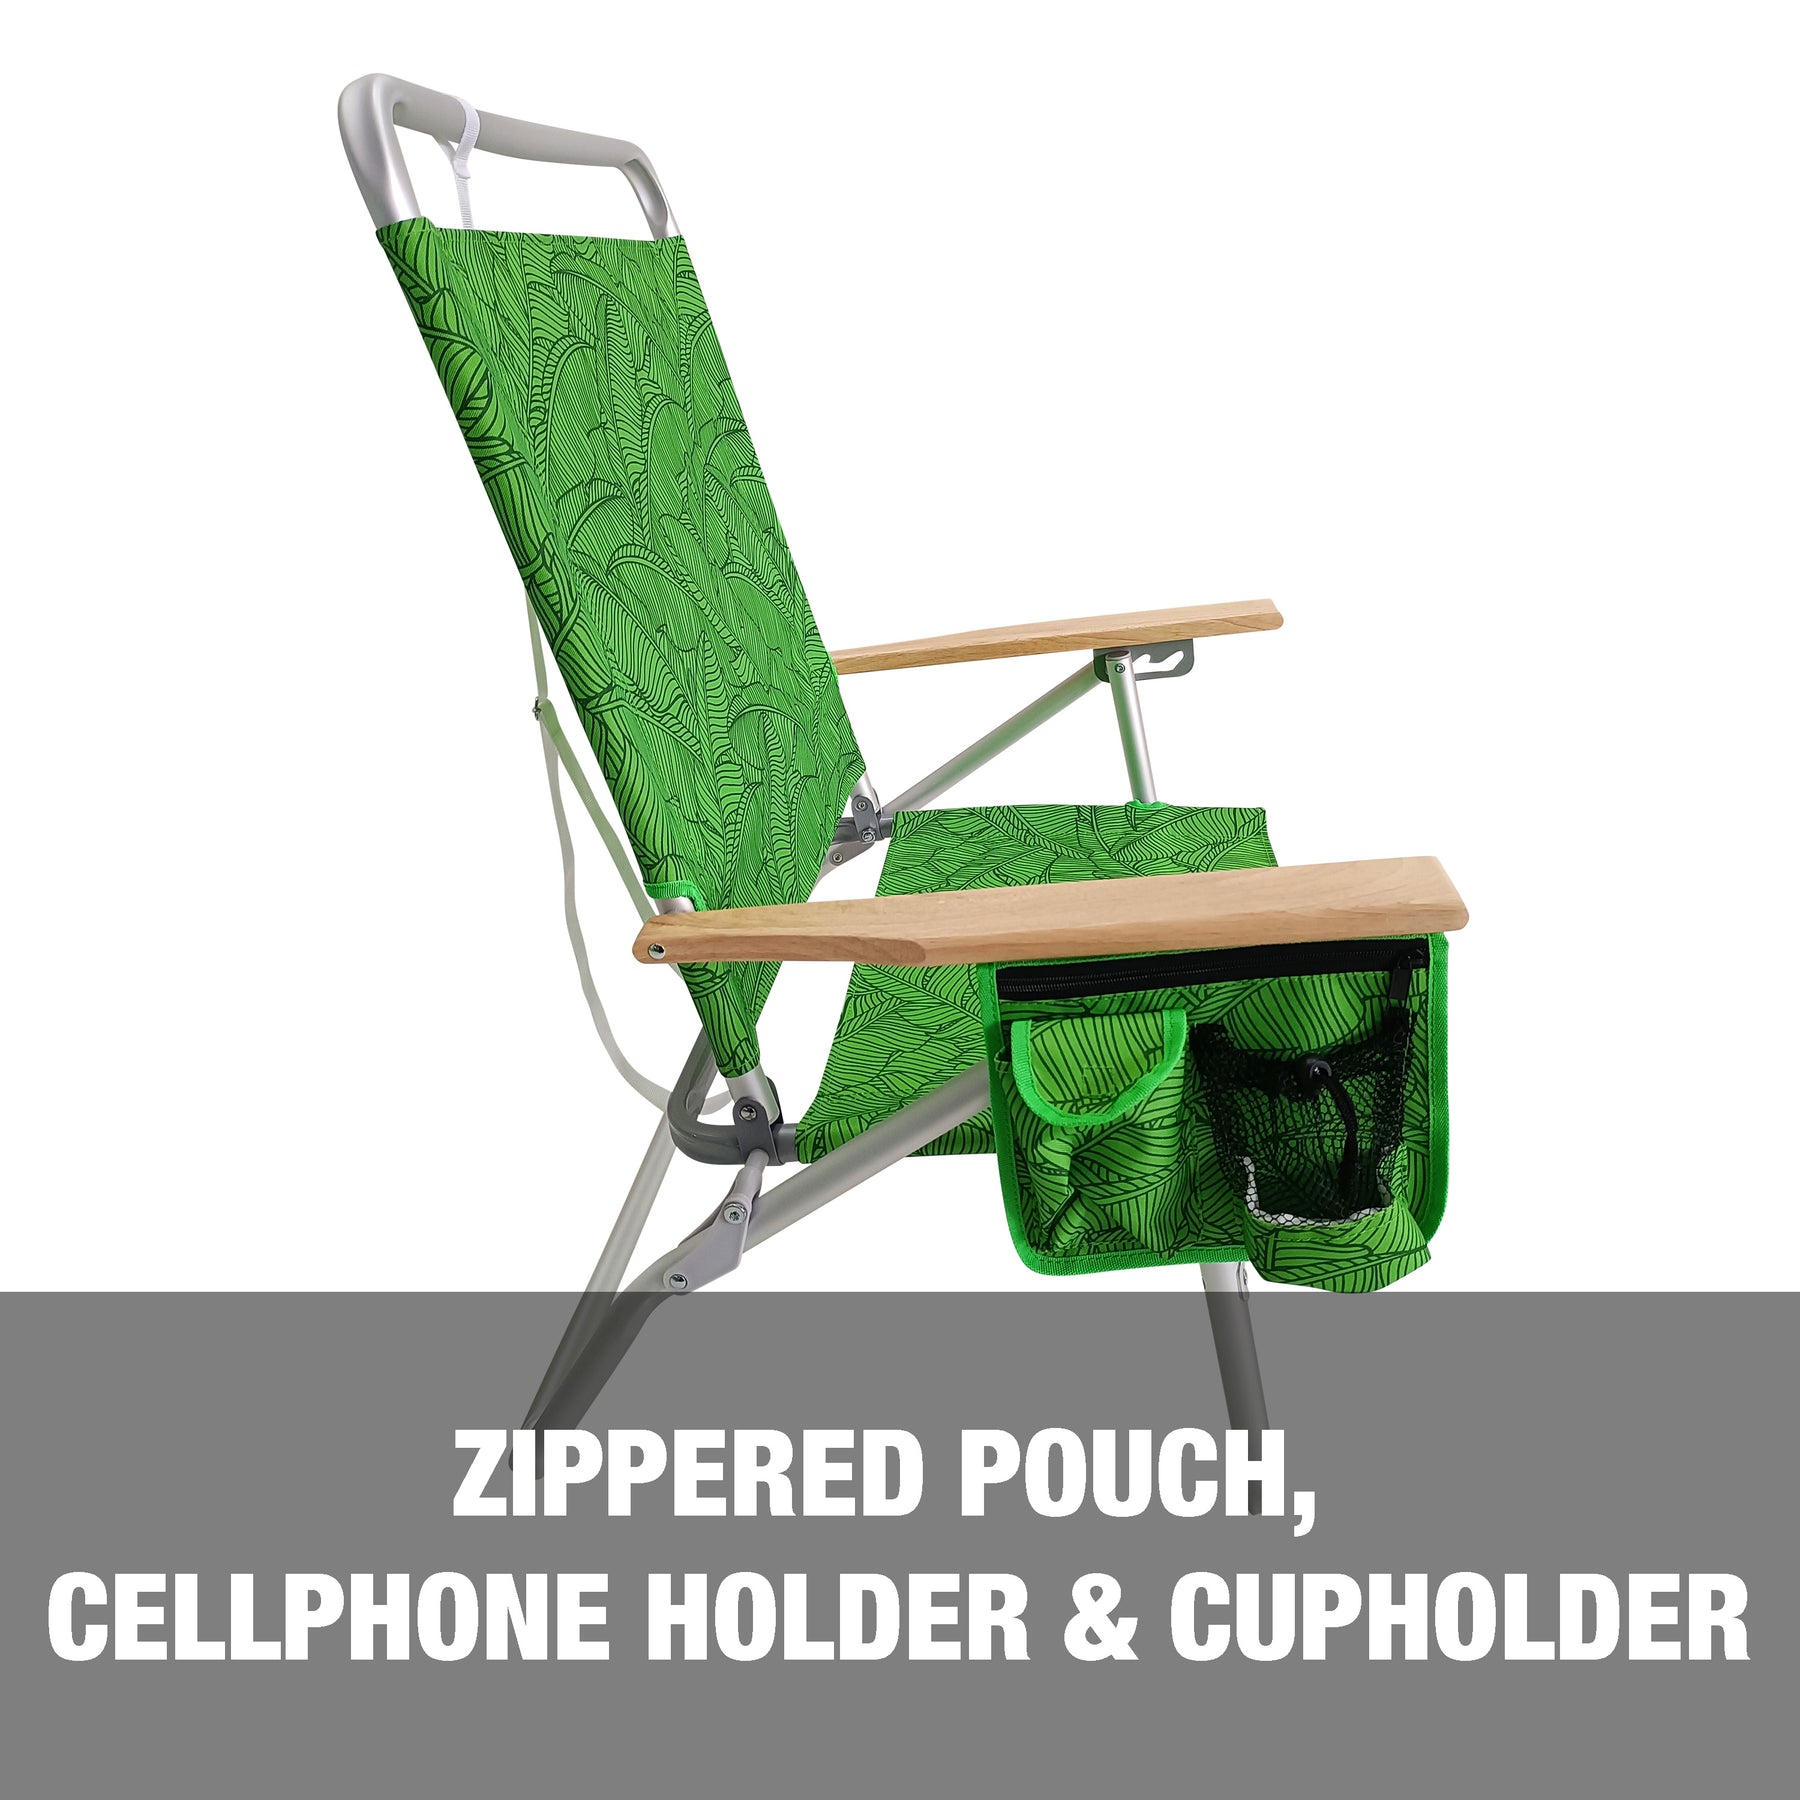 Bliss Hammocks Foldable Beach Chair comes with a zippered pouch, cellphone holder, and cup holder.